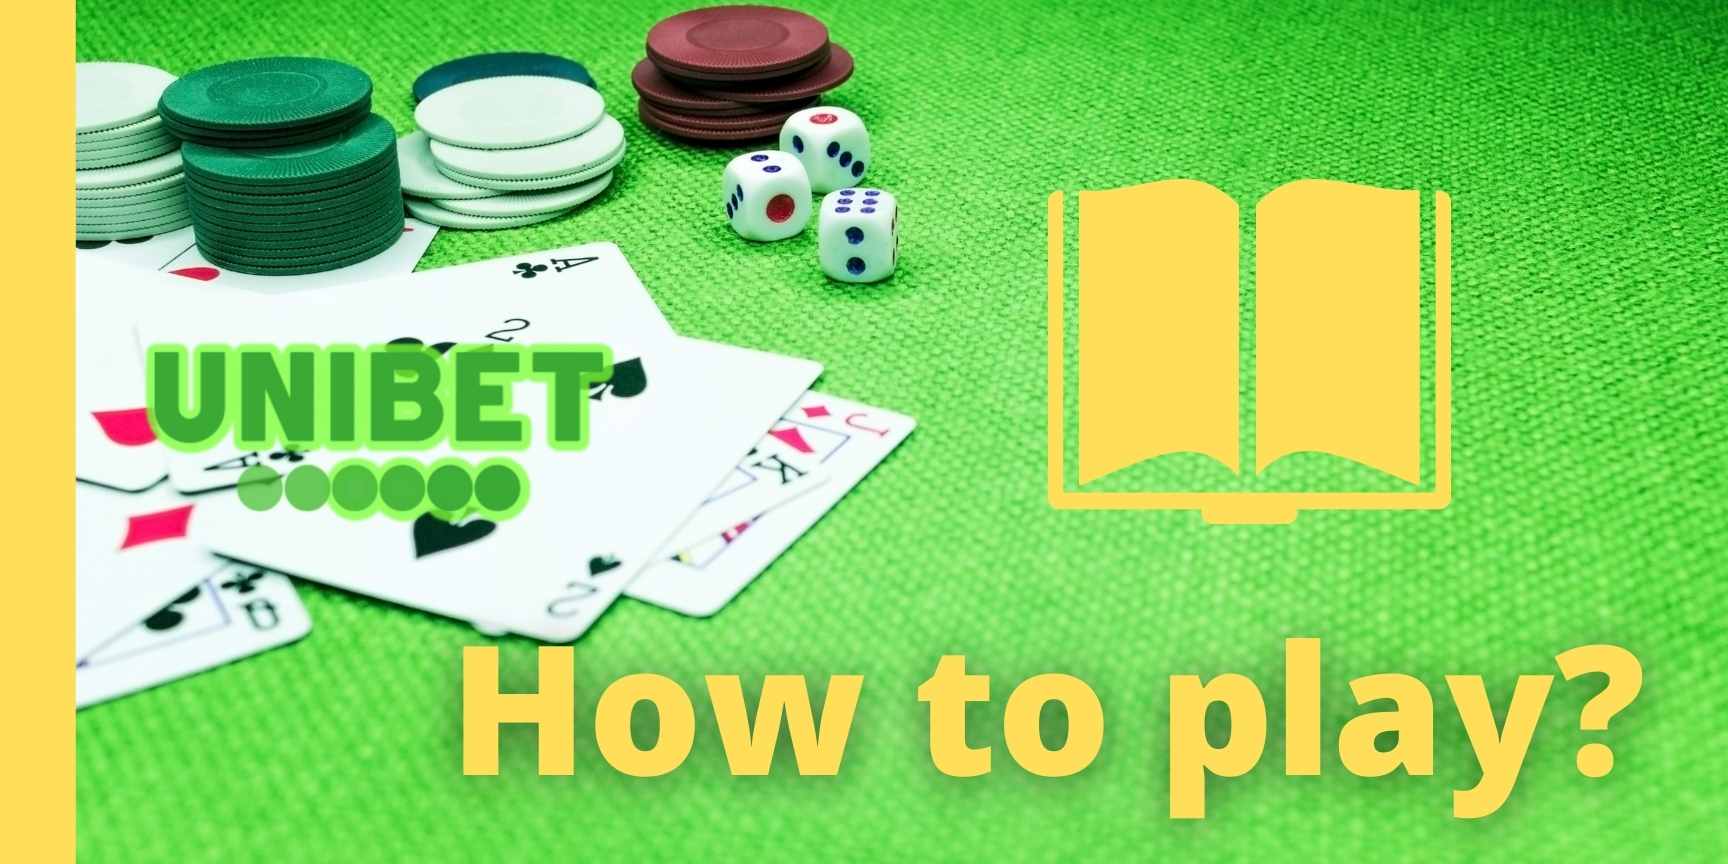 how to play?